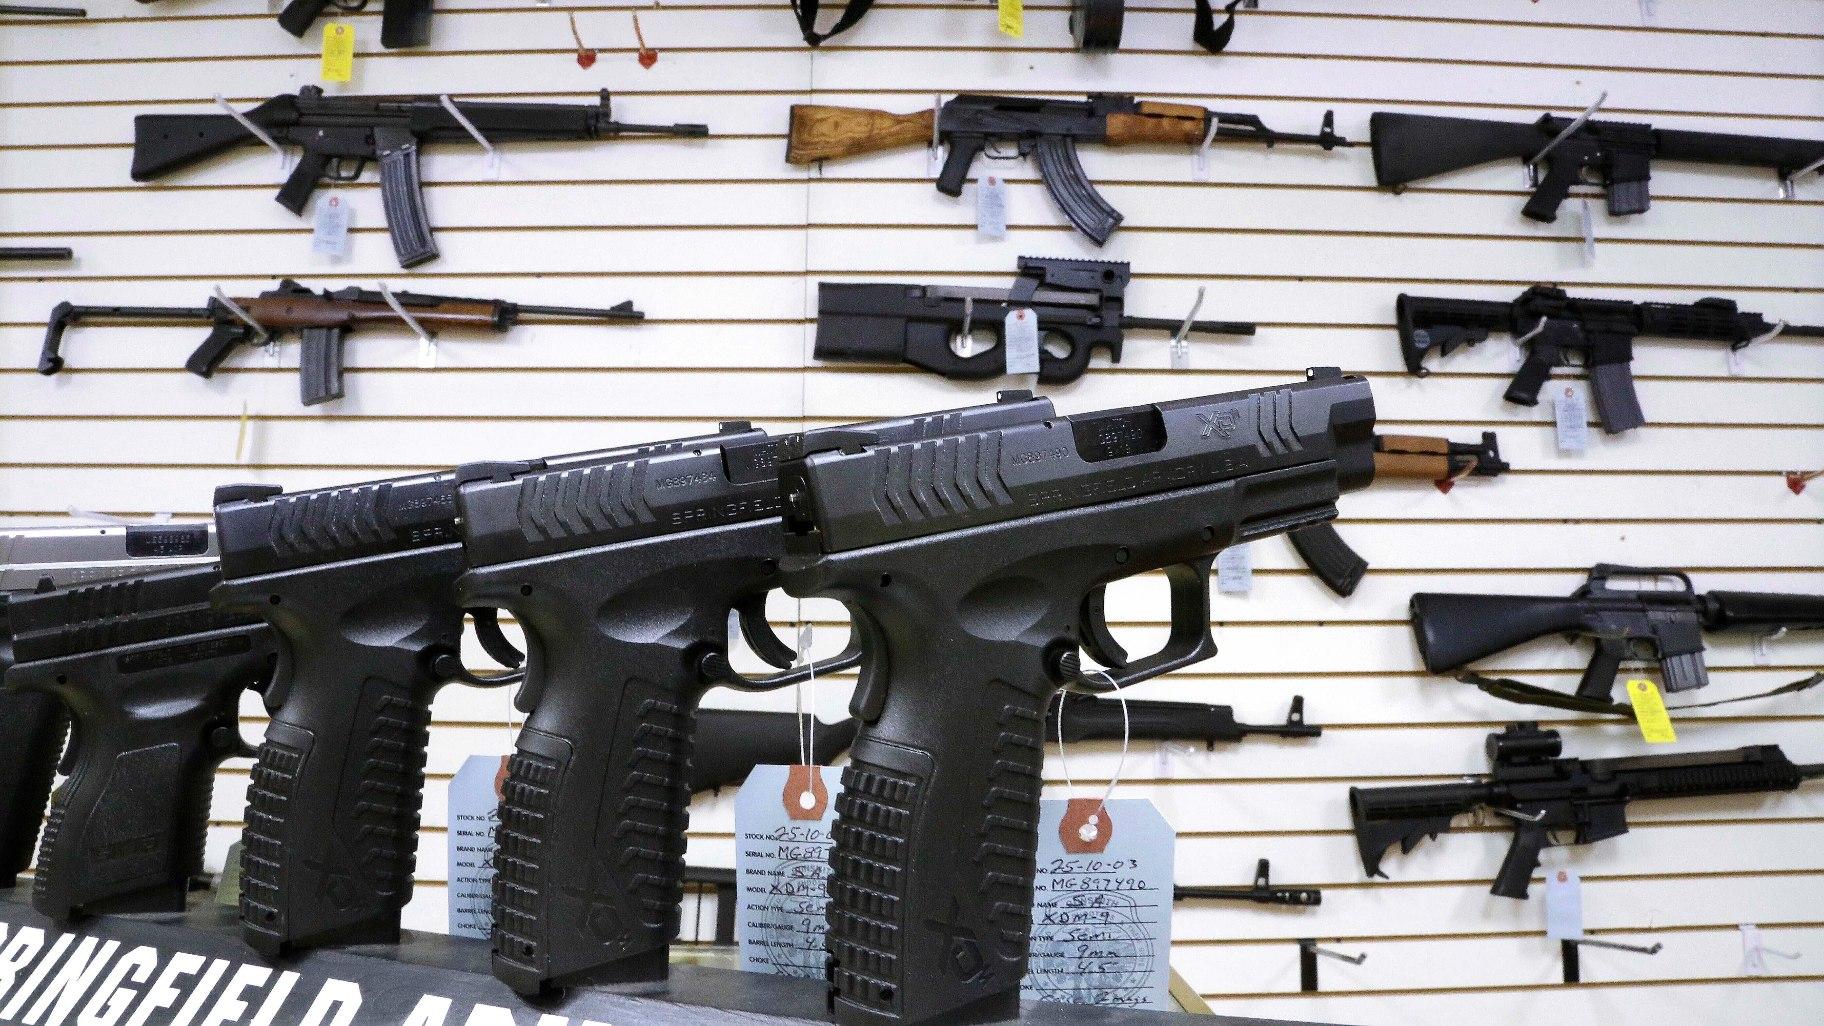 Semi-automatic guns are displayed for sale at Capitol City Arms Supply, Jan. 16, 2013, in Springfield, Ill. (AP Photo / Seth Perlman, File)